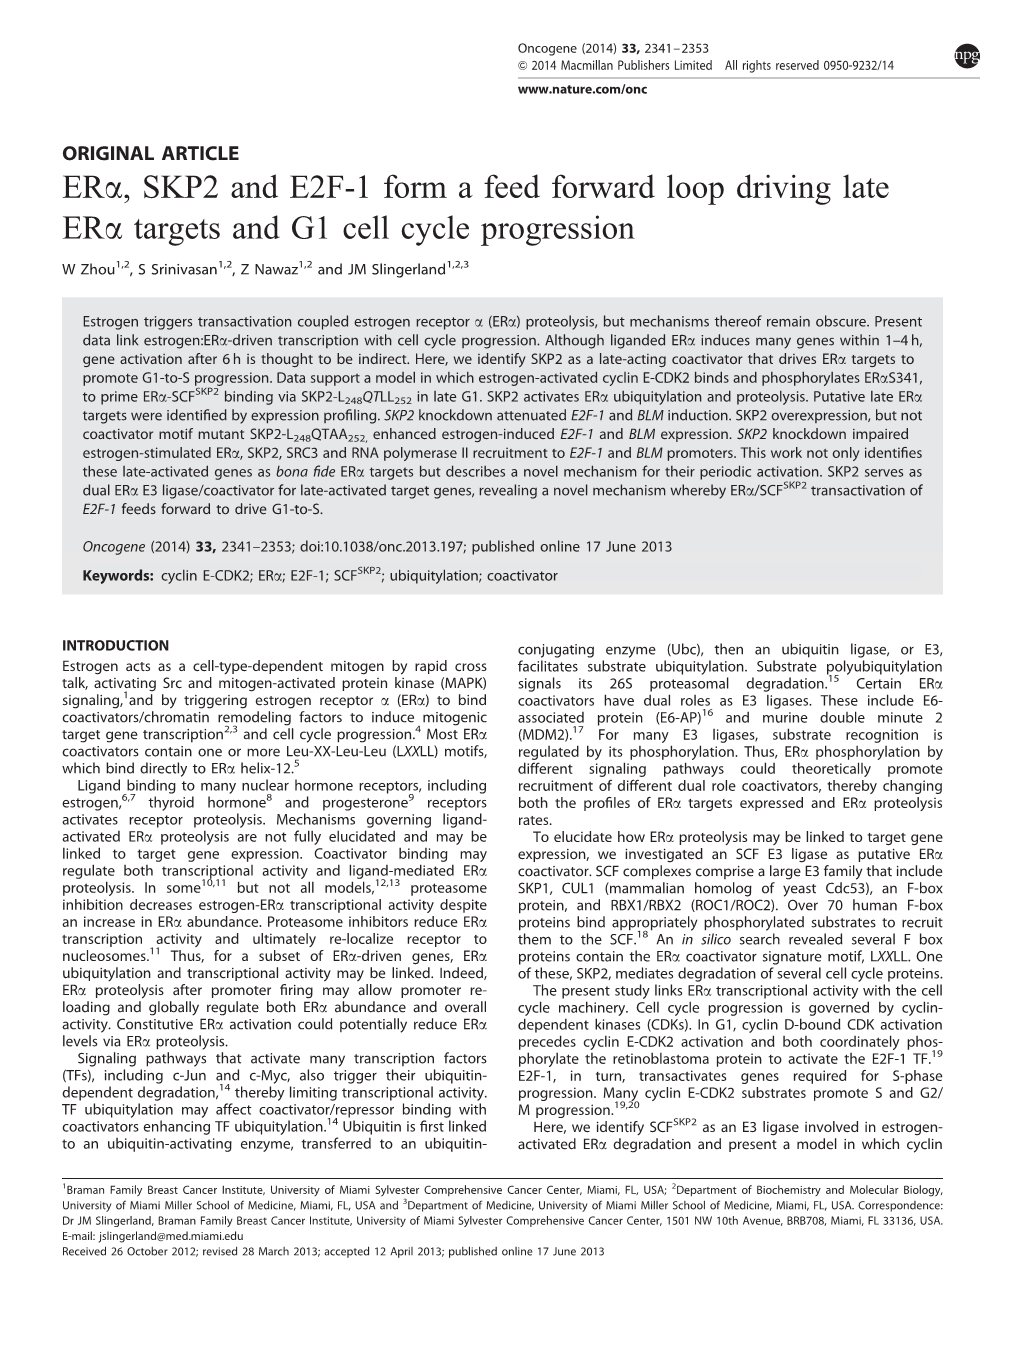 Targets and G1 Cell Cycle Progression